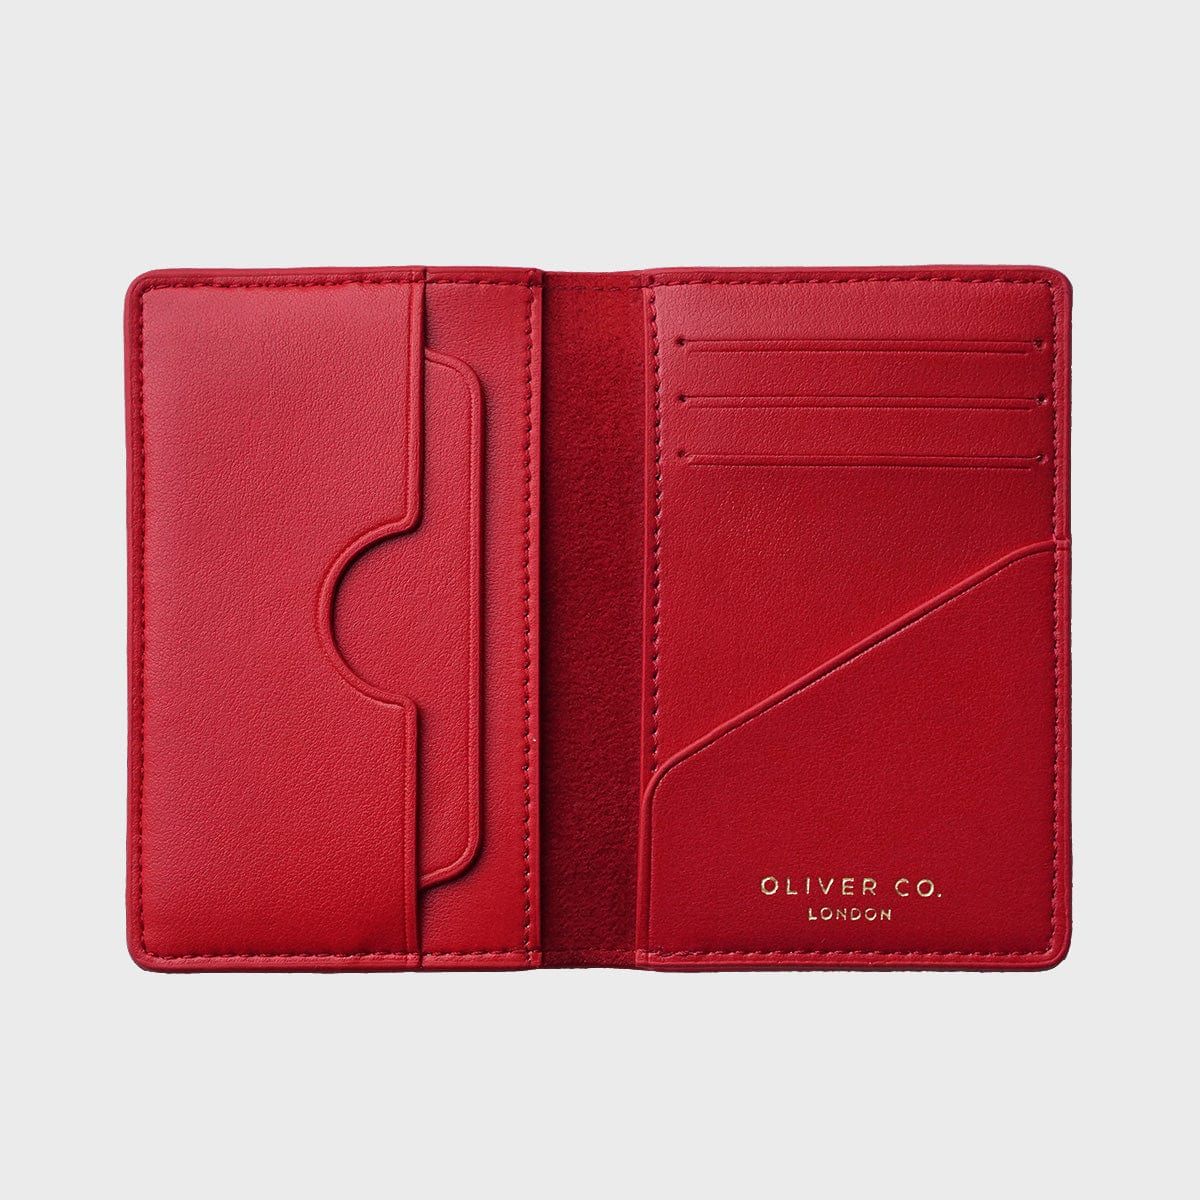 Organize Your Essentials: Red Wallets for Every Occasion